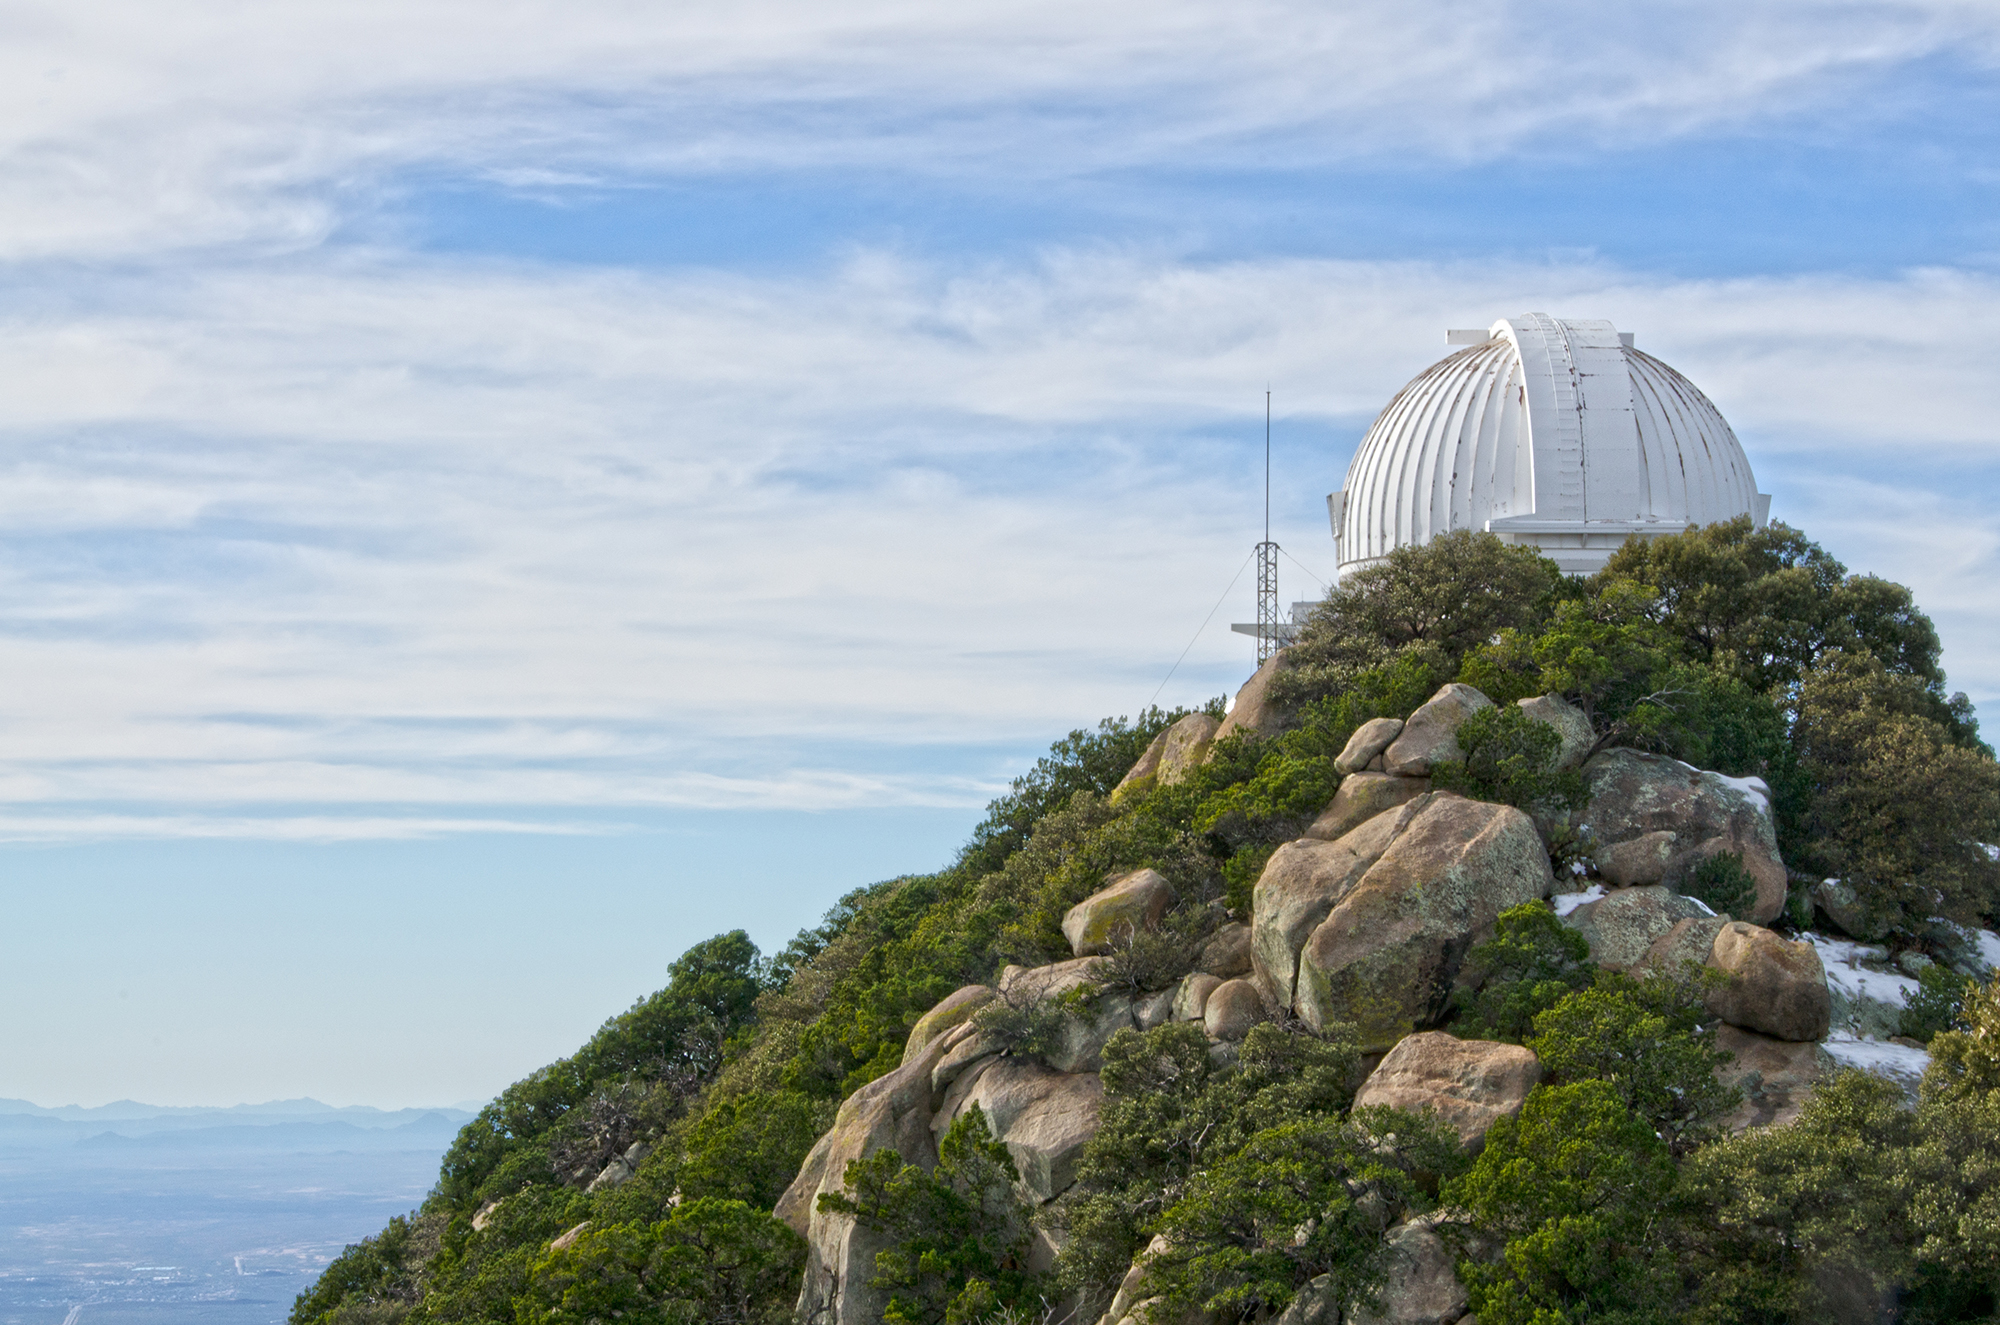 Observatory on the peak of a mountain